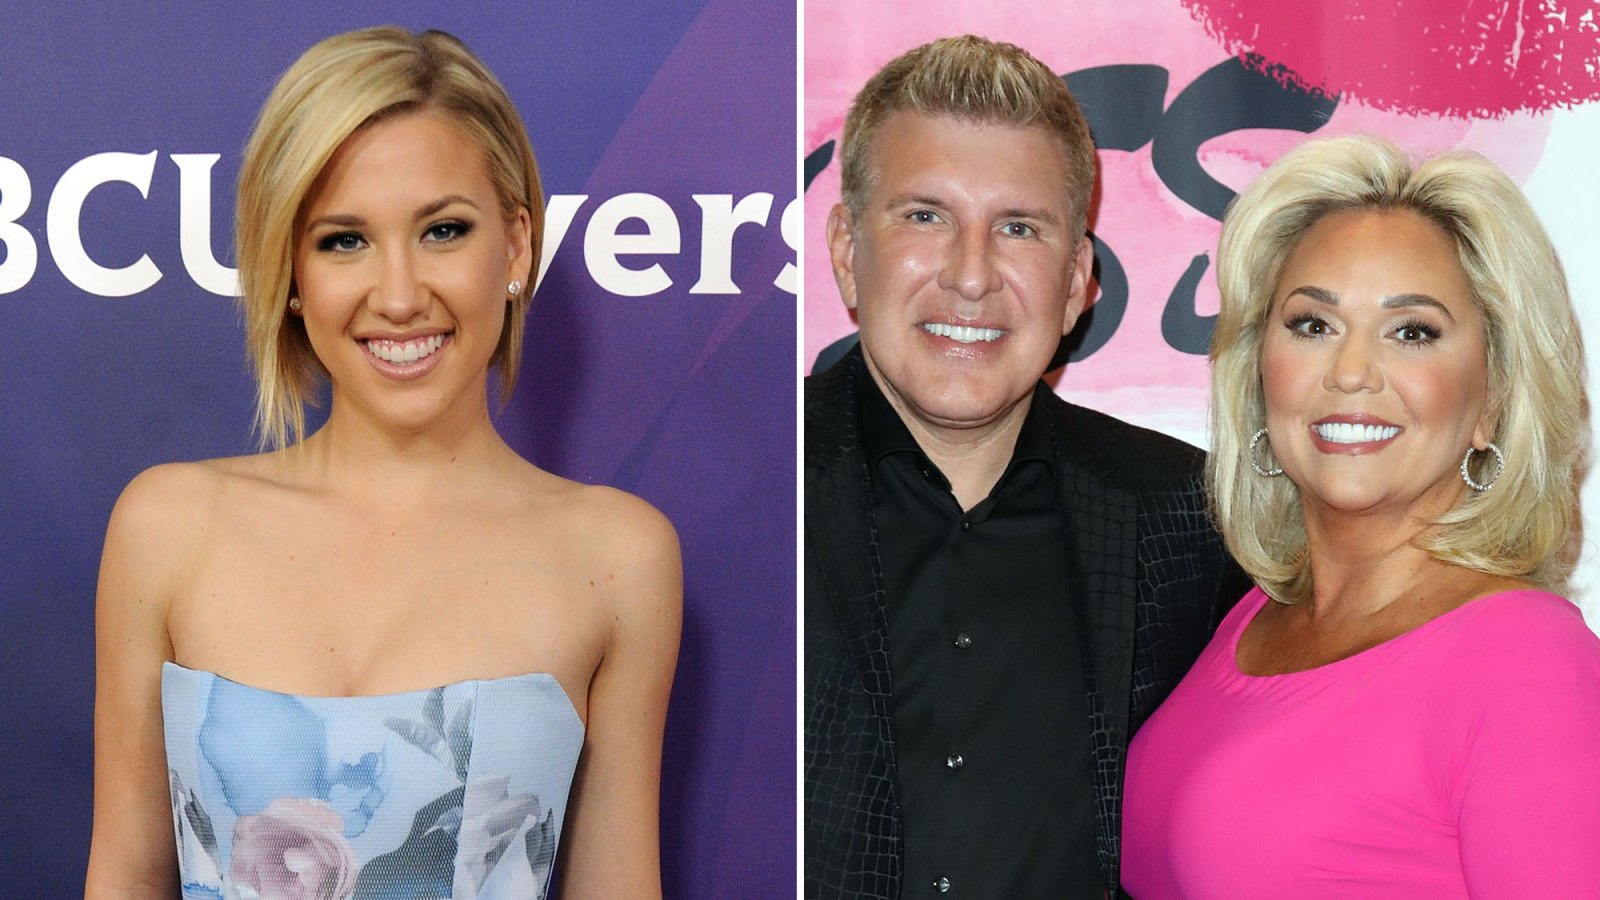 Chrisley Knows Best’s Savannah Chrisley Speaks Out About Todd and Julie Chrisley’s Fraud Conviction